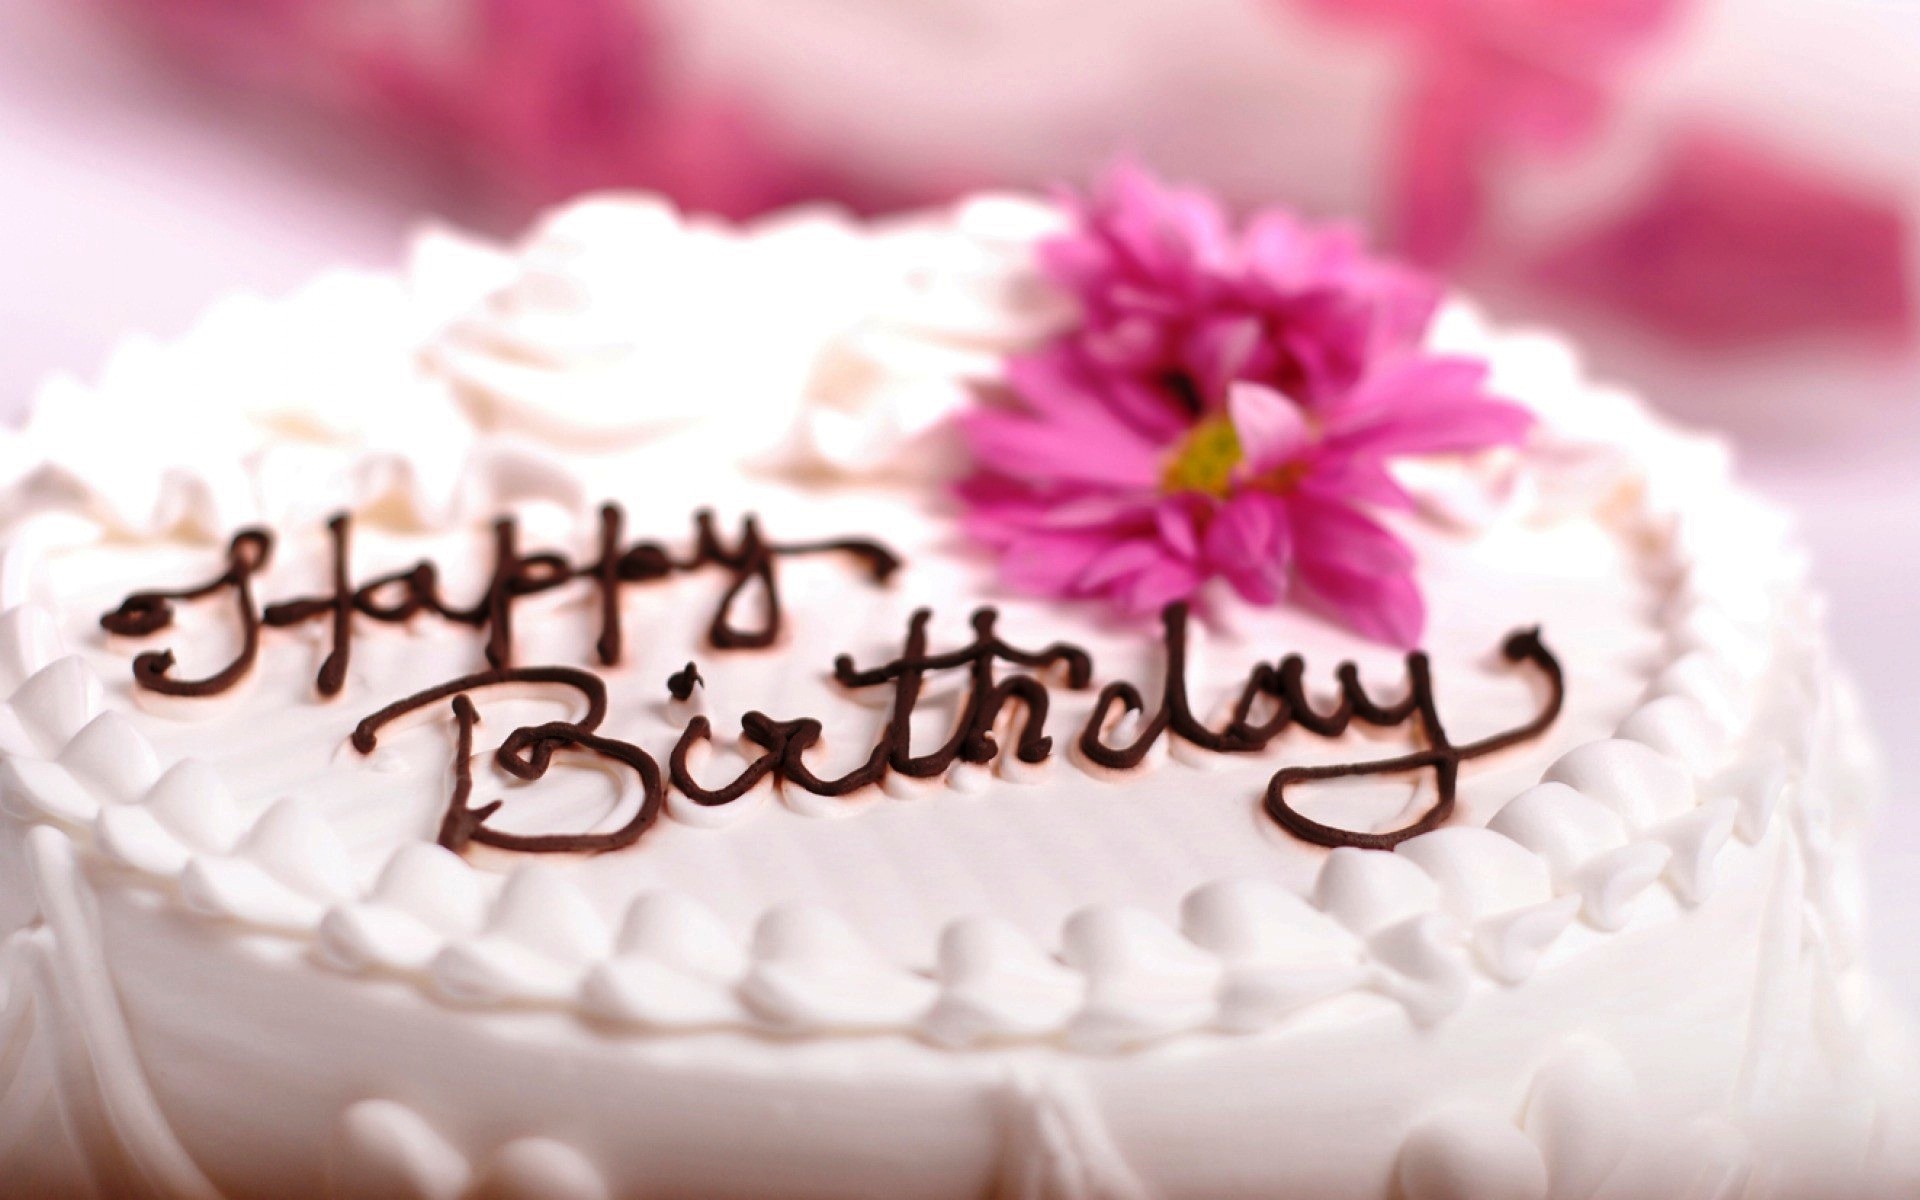 Birthday Cakes hd wallpapers. 